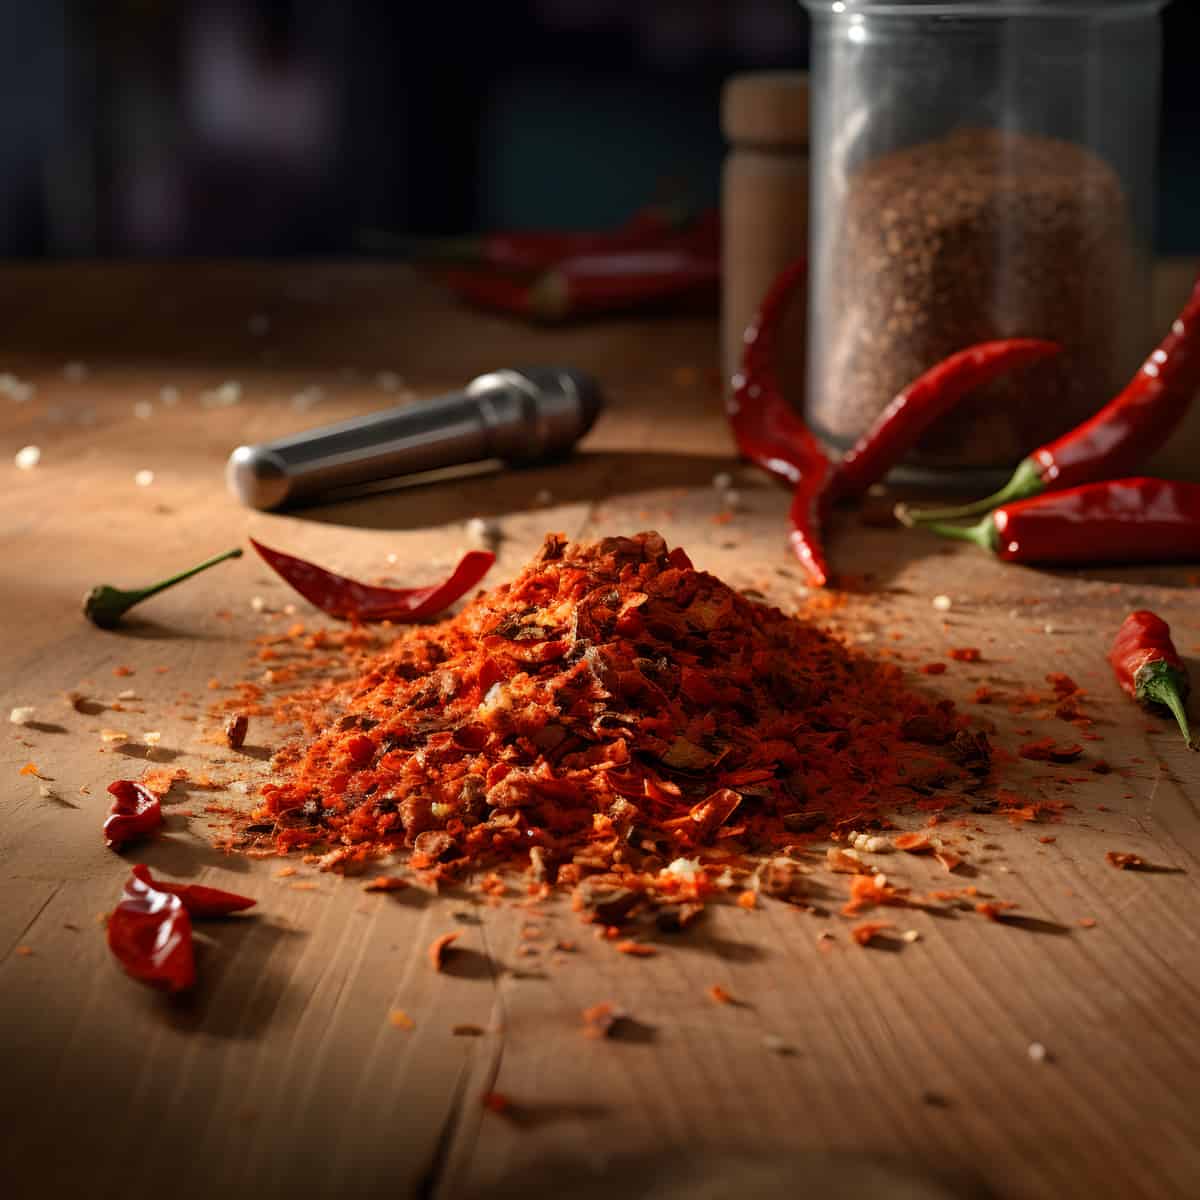 Crushed Red Pepper on a kitchen counter